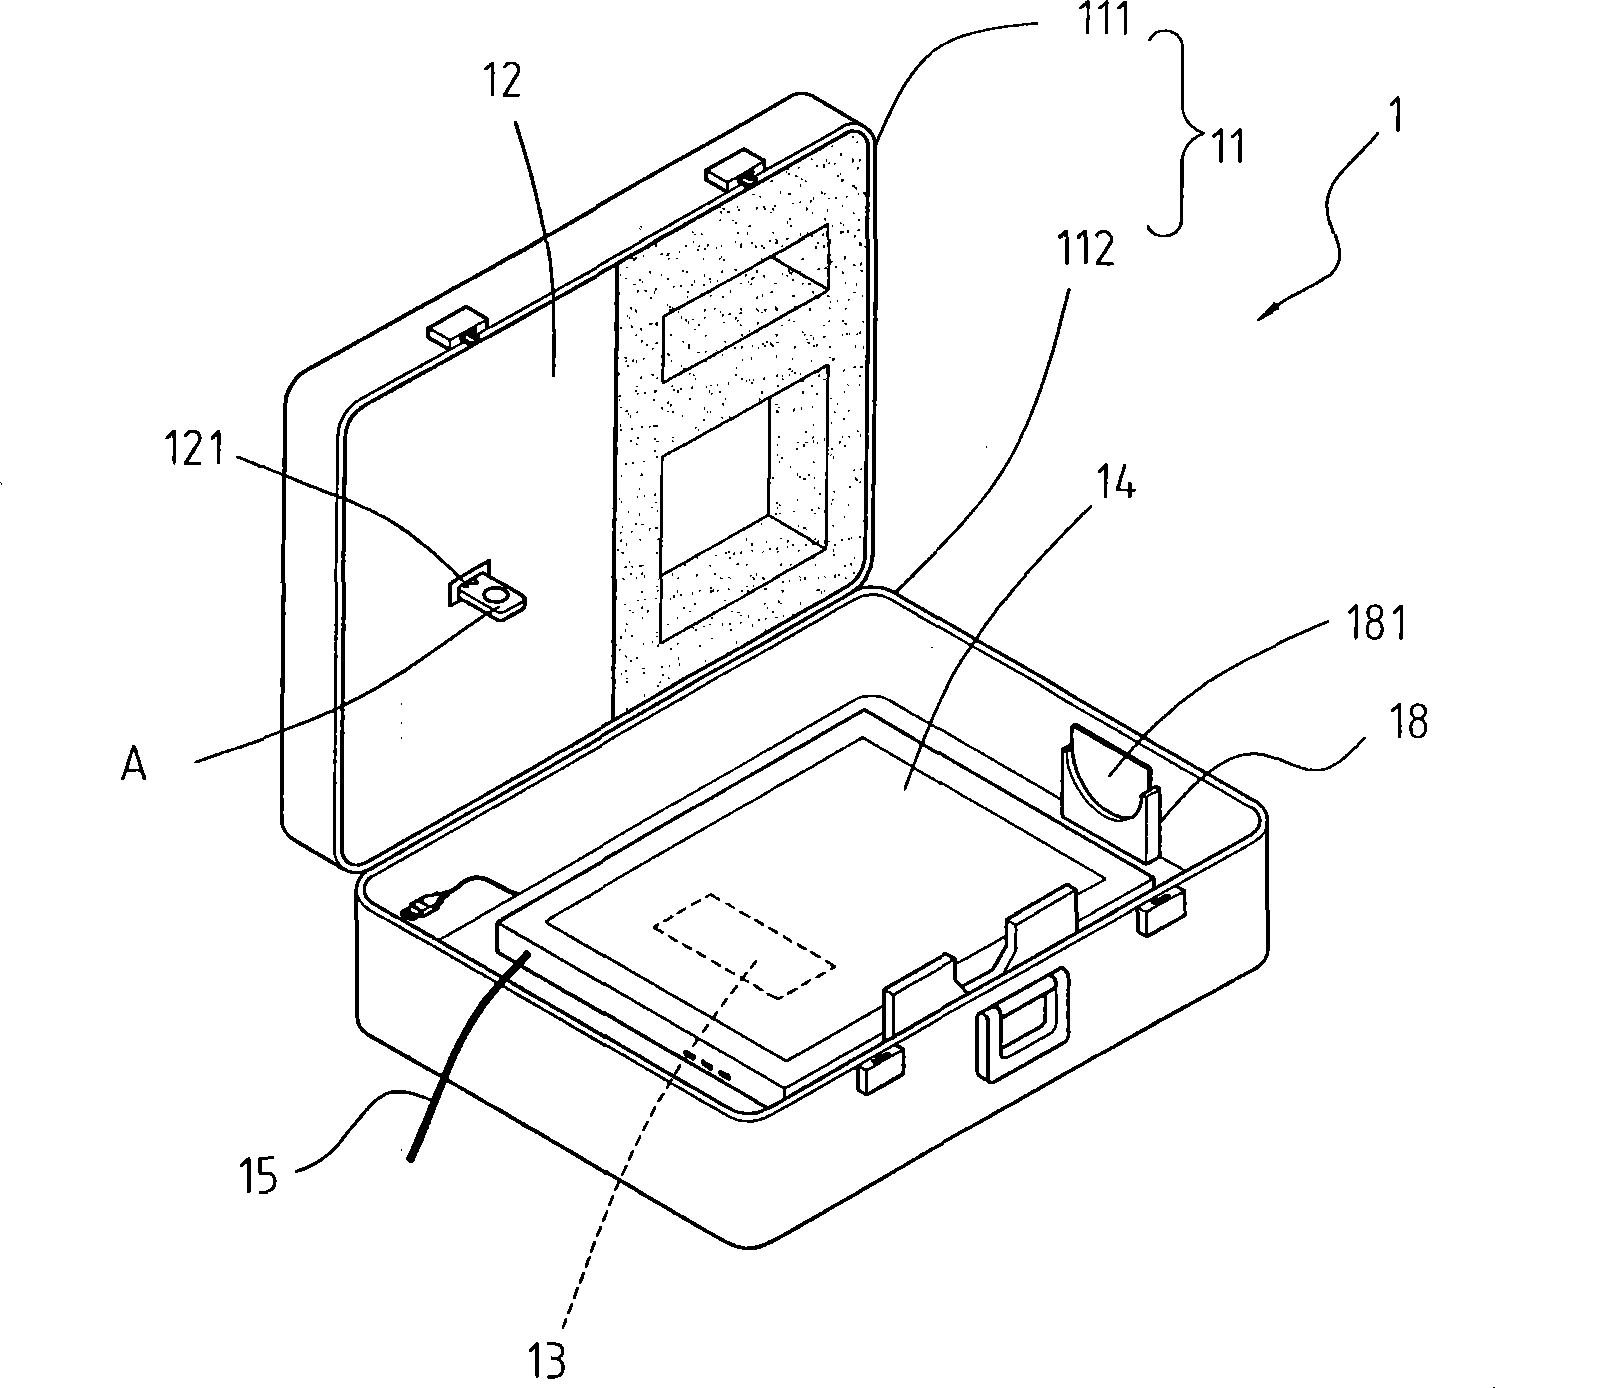 Portable biomedical detection device